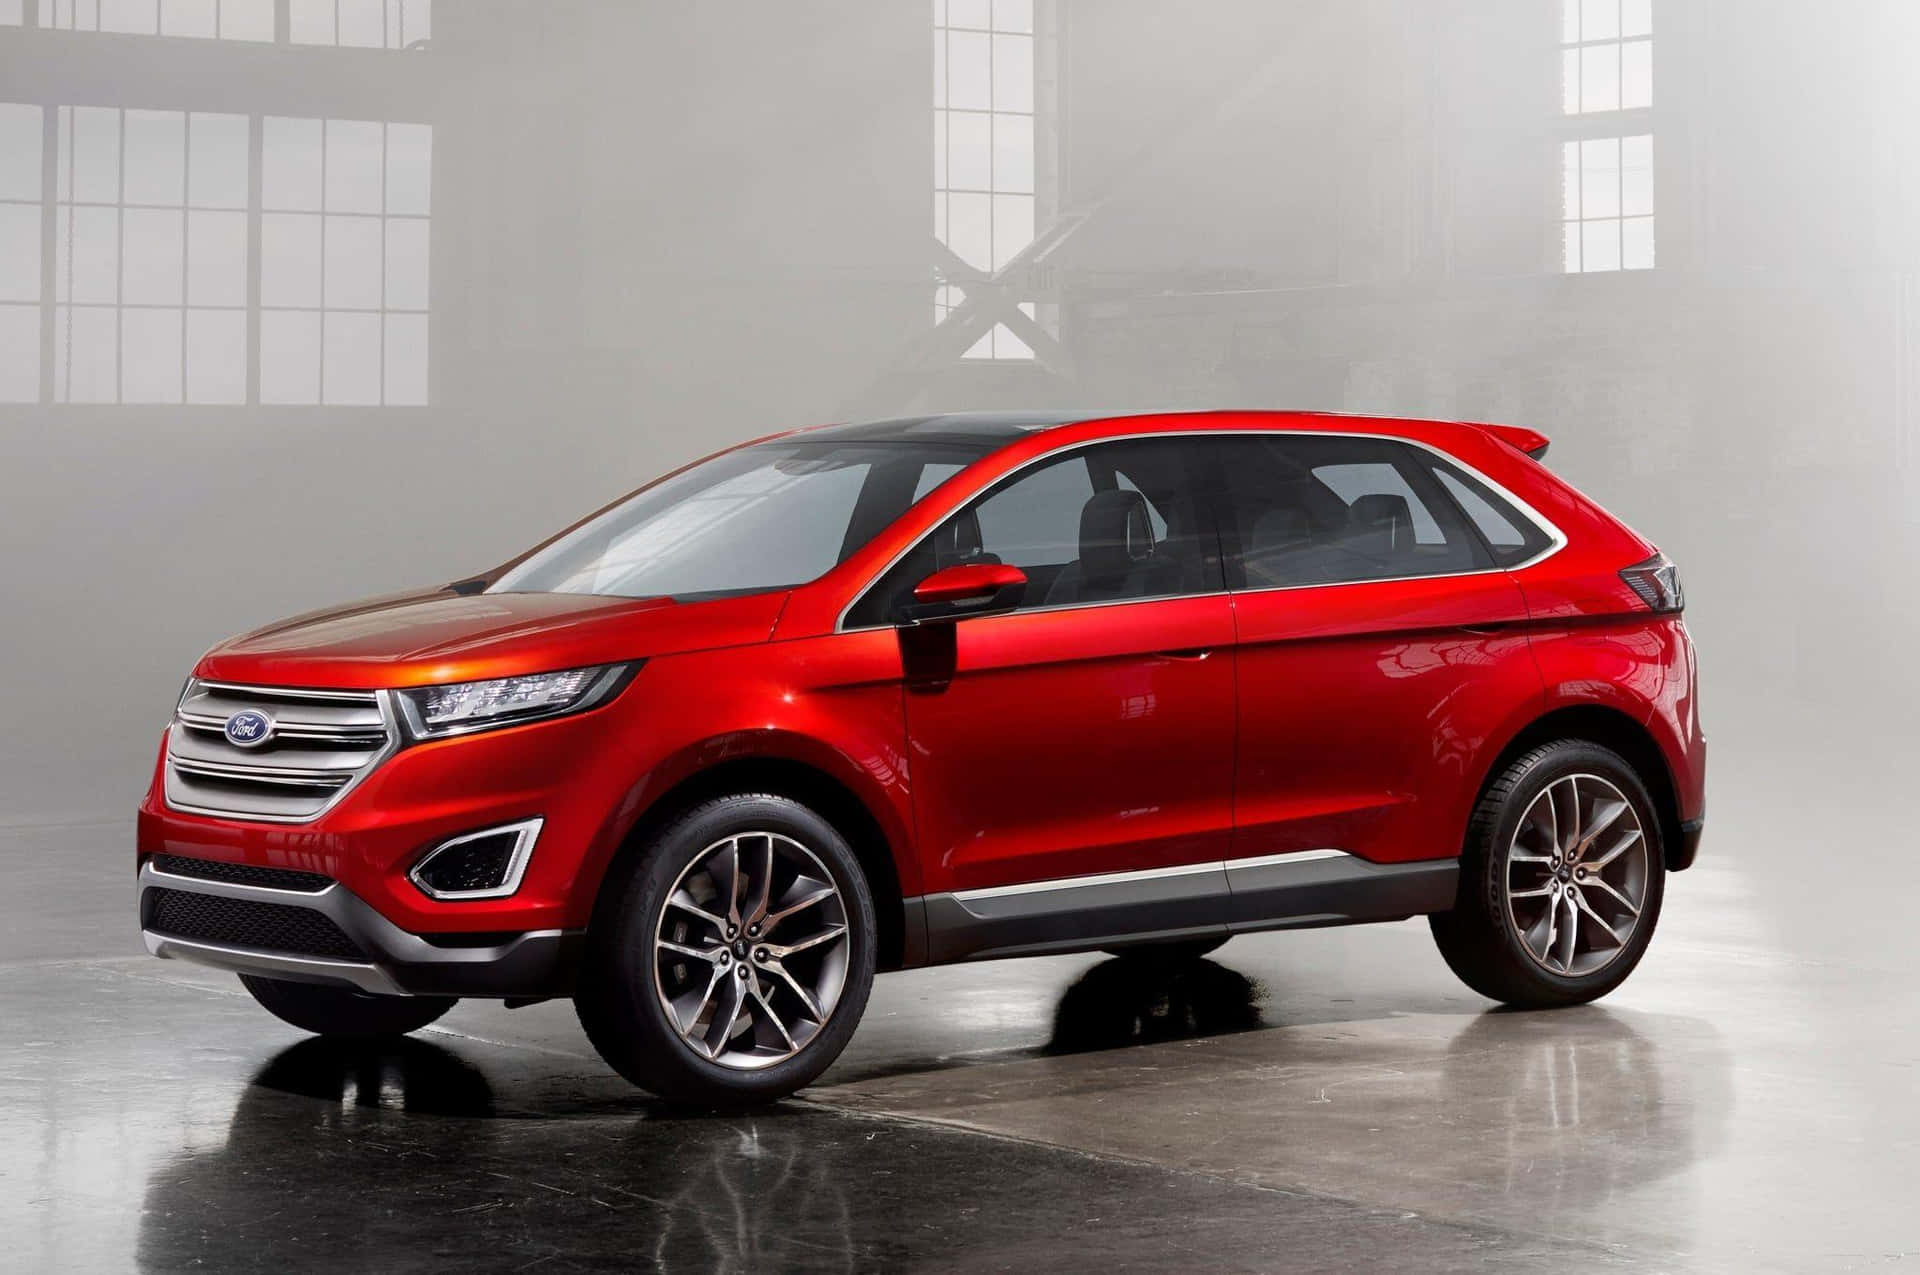 Ford Edge driving on the open road Wallpaper